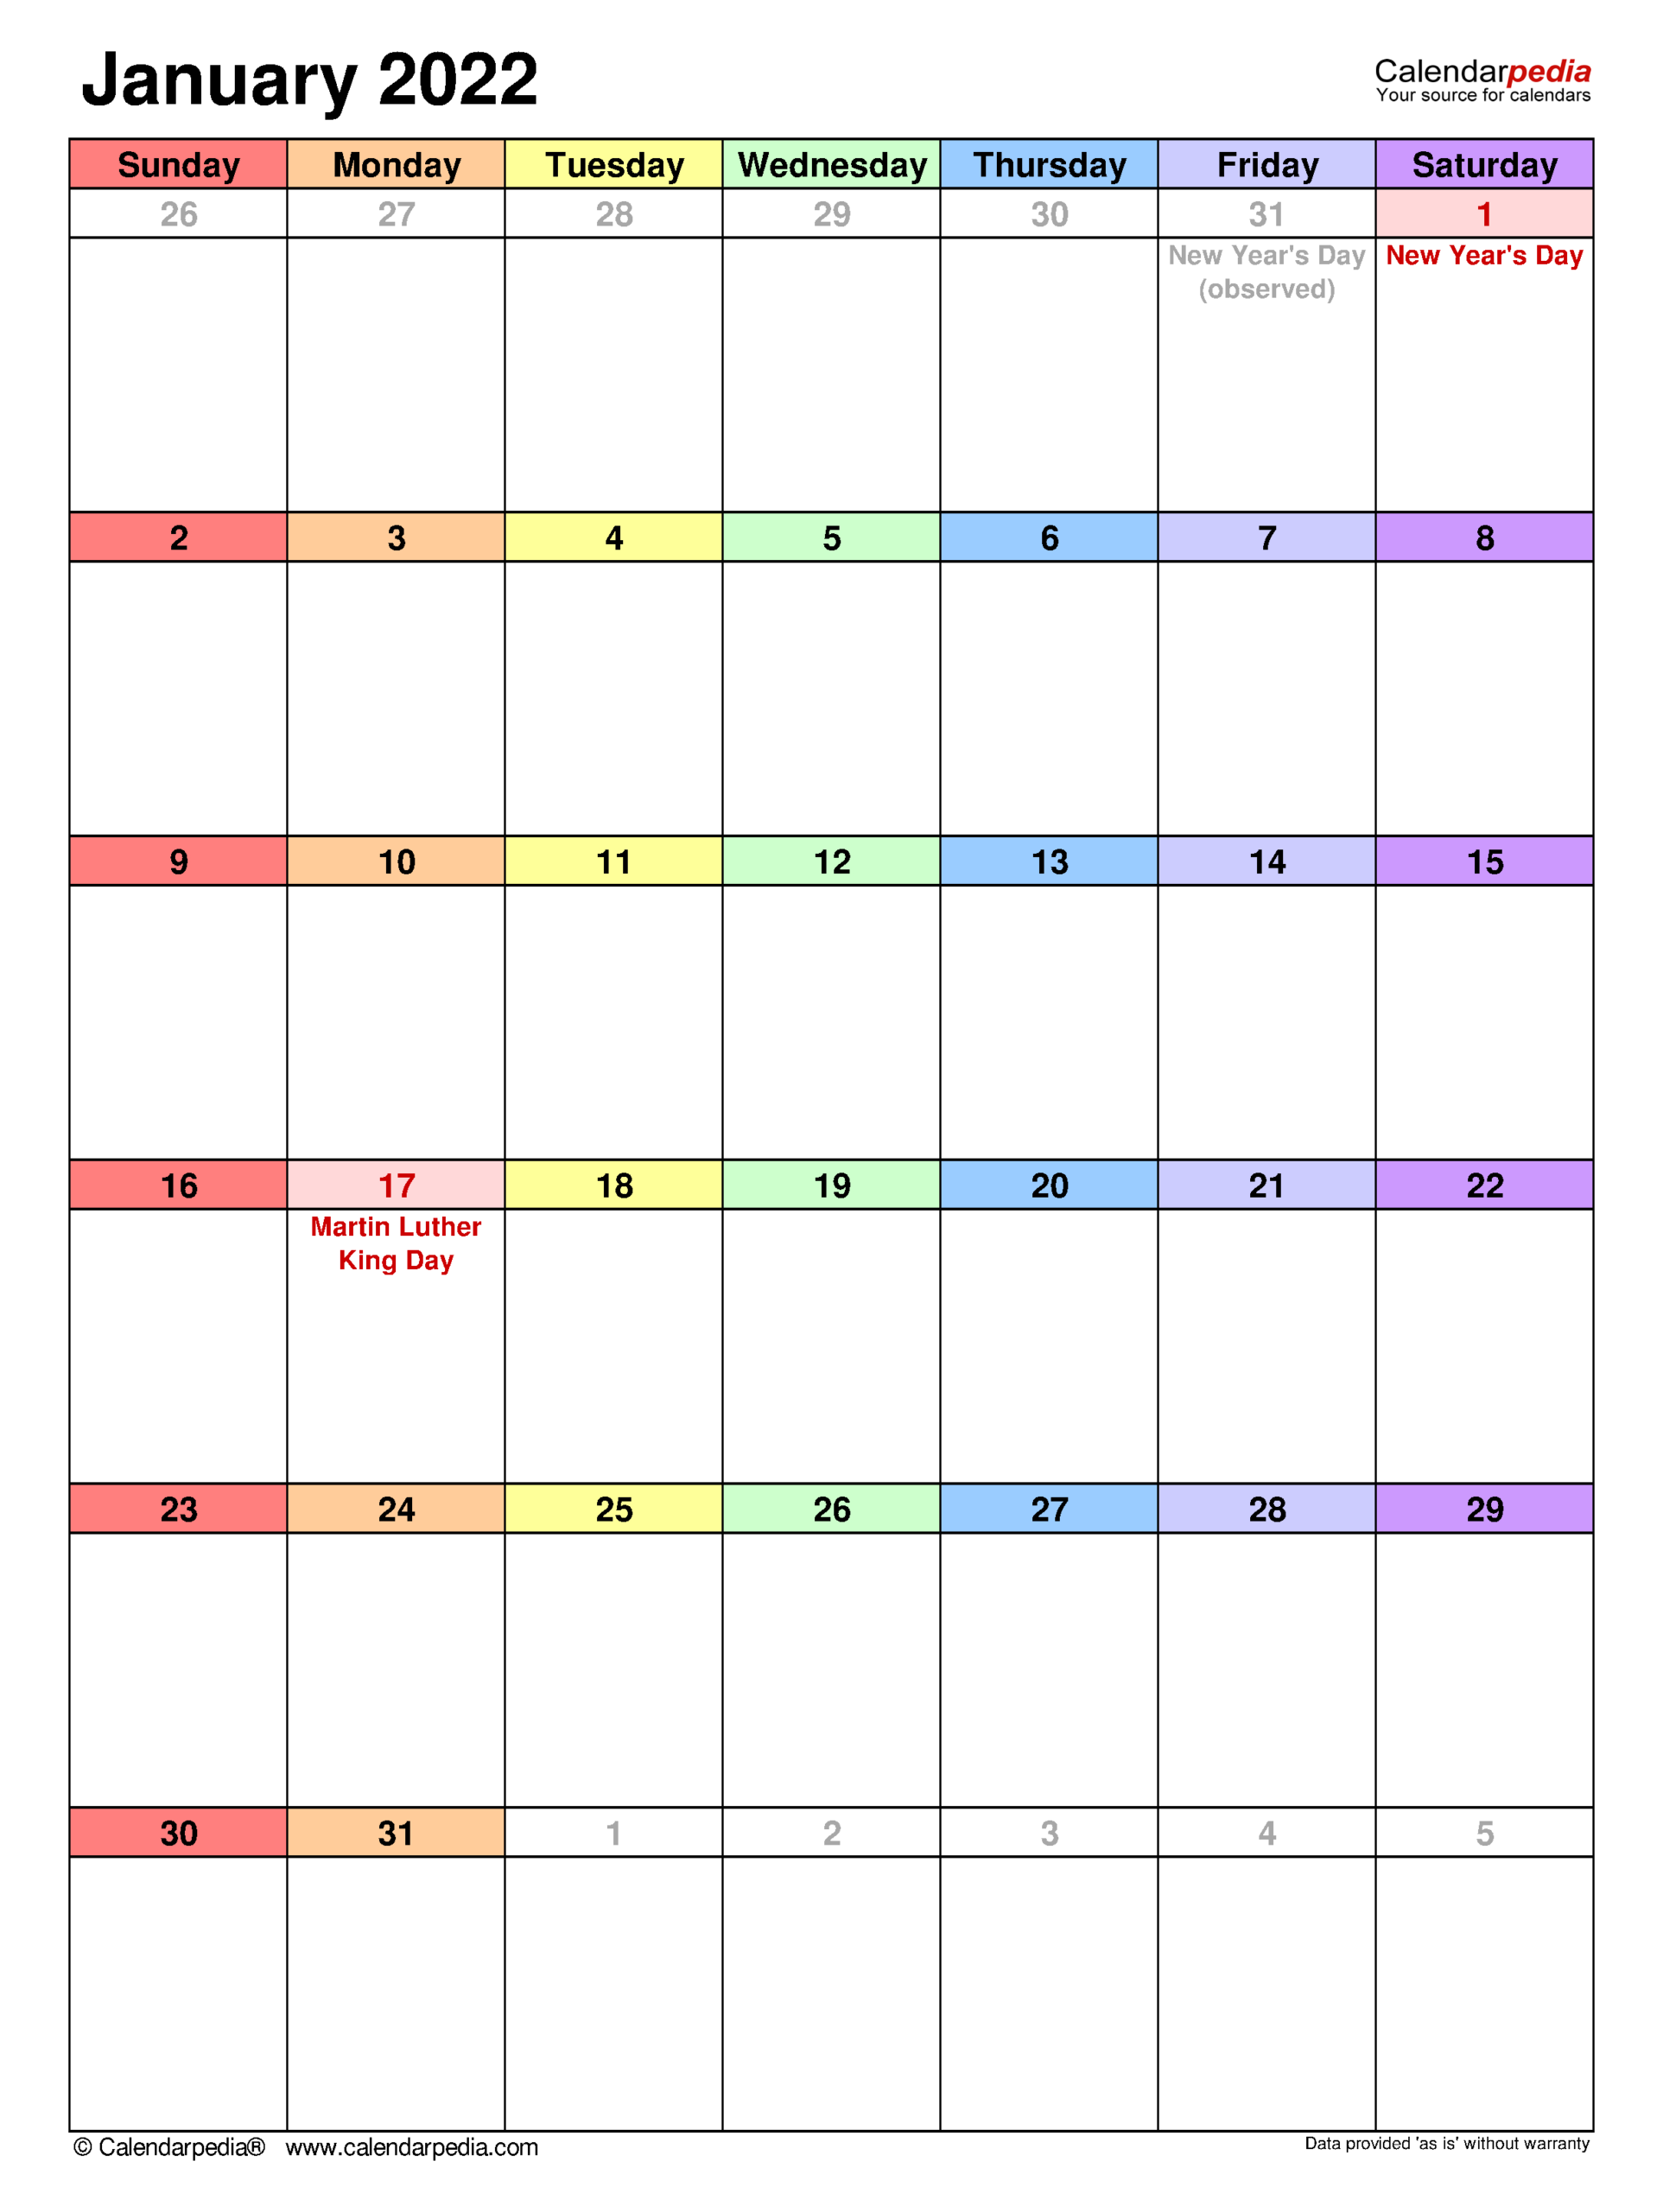 January 2022 Calendar | Templates For Word, Excel And Pdf